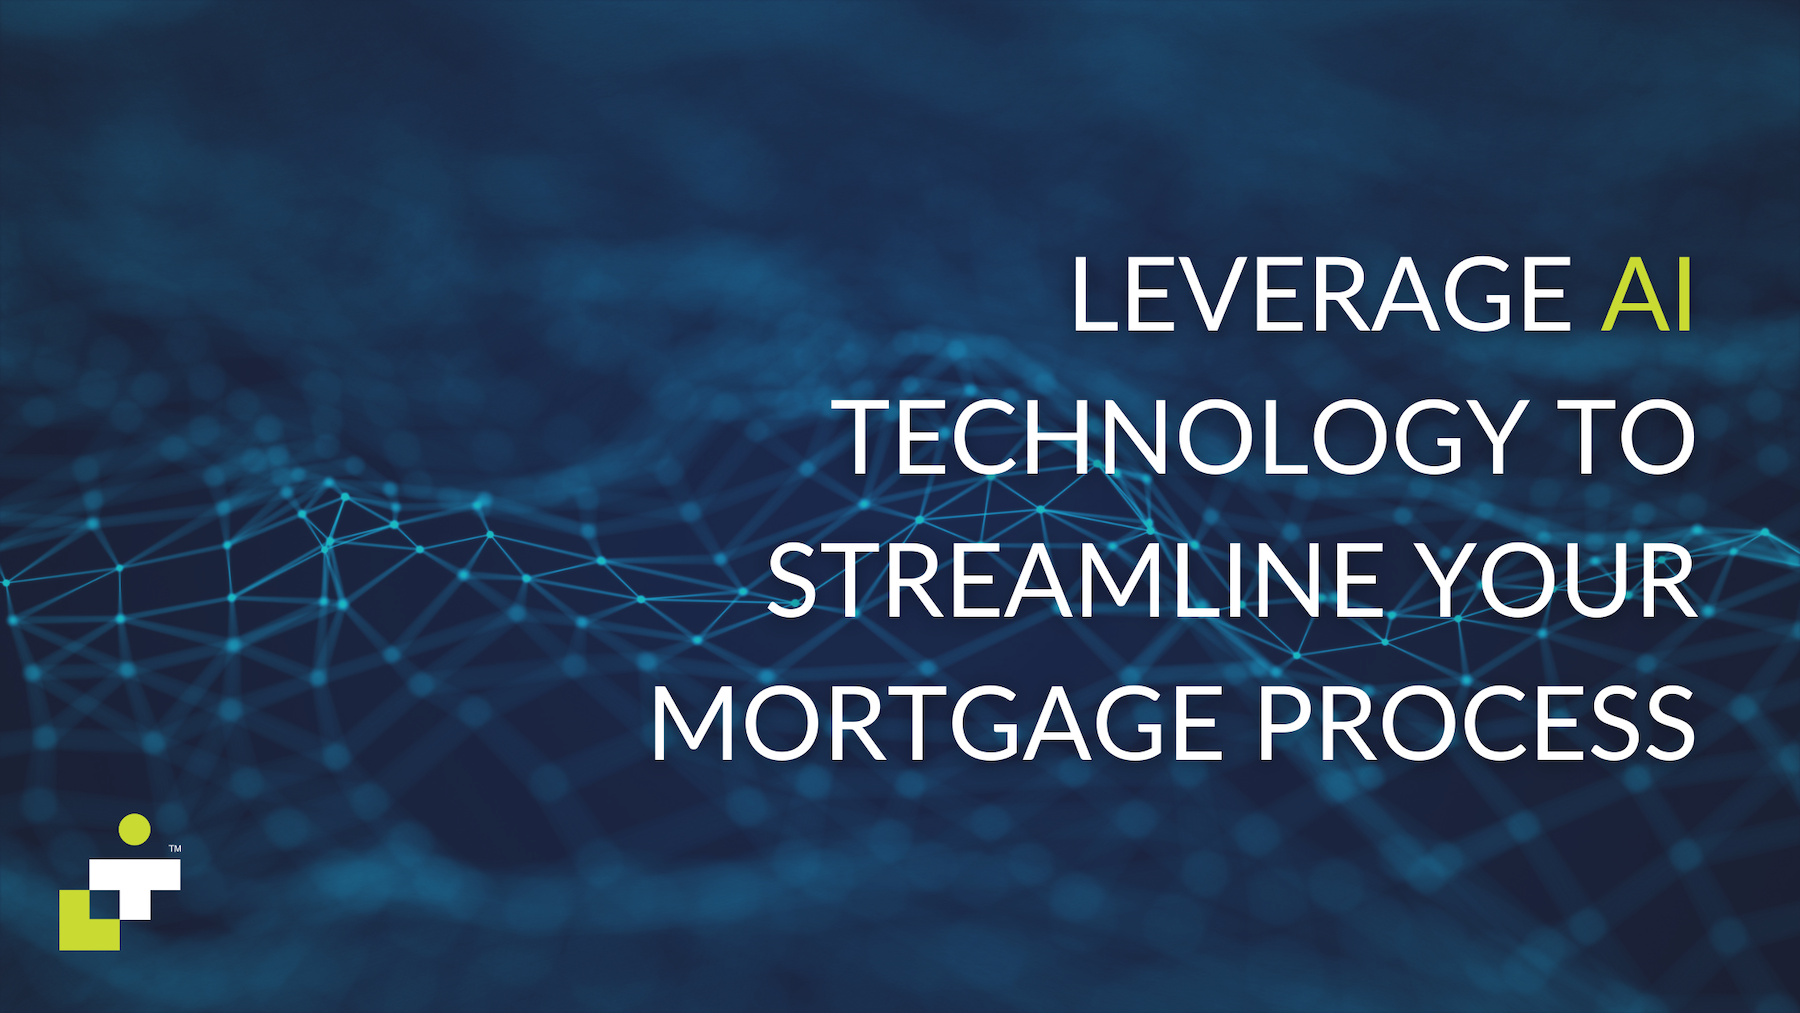 Leverage AI Technology to Streamline Your Mortgage Process  